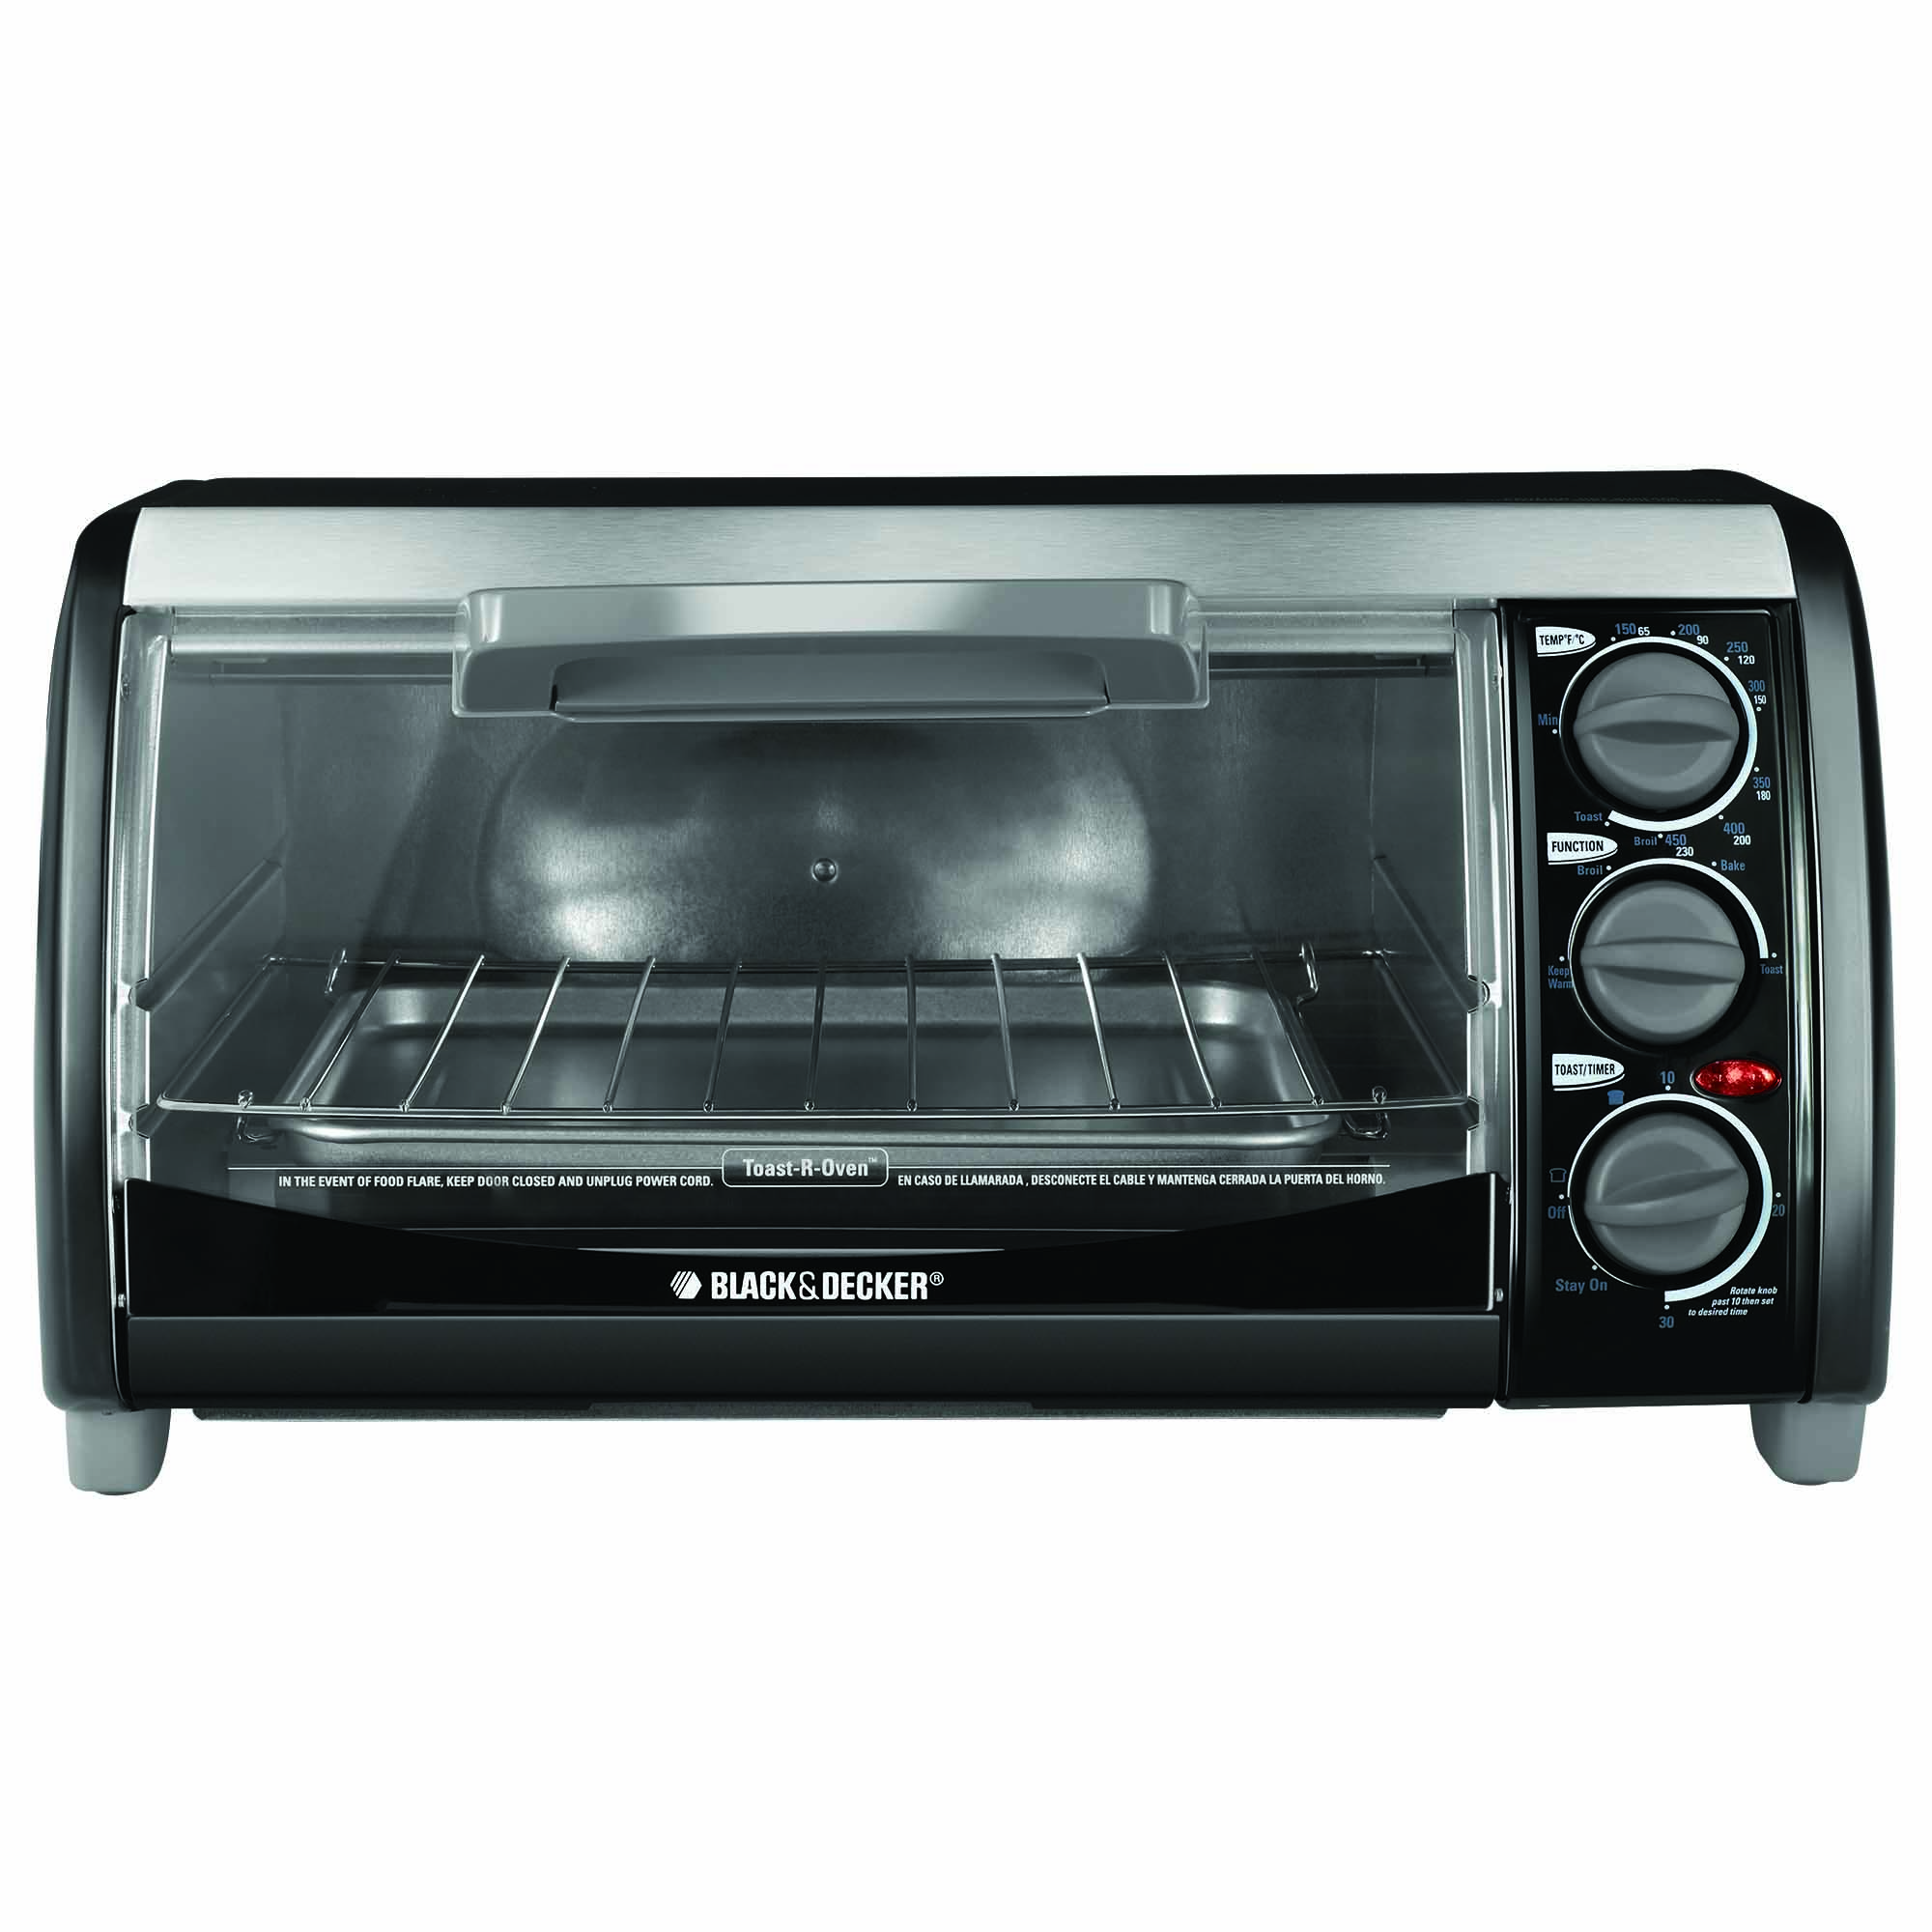 https://s7cdn.spectrumbrands.com/~/media/SmallAppliancesUS/Black%20and%20Decker/Product%20Page/cooking%20appliances/convection%20and%20toaster%20ovens/TRO490B/TRO490B_HERO_HR.jpg?h=2000&la=en&w=2000